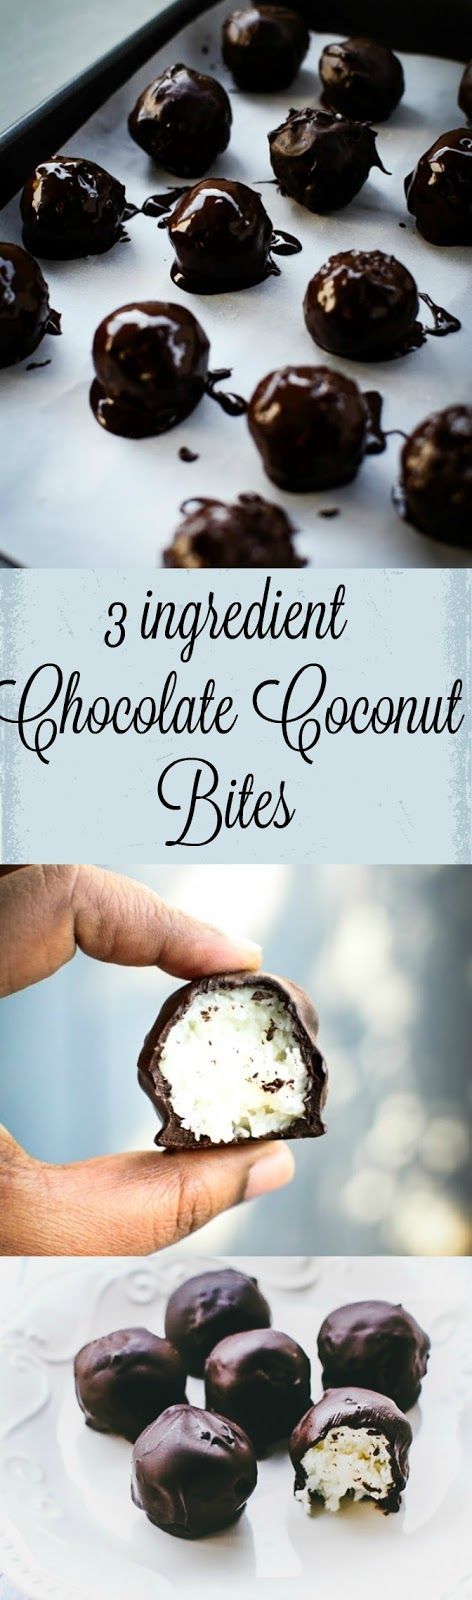 Guys, have an amazing and easy dessert for upcoming holiday season by making this 3 ingredient Chocolate Coconut Balls.